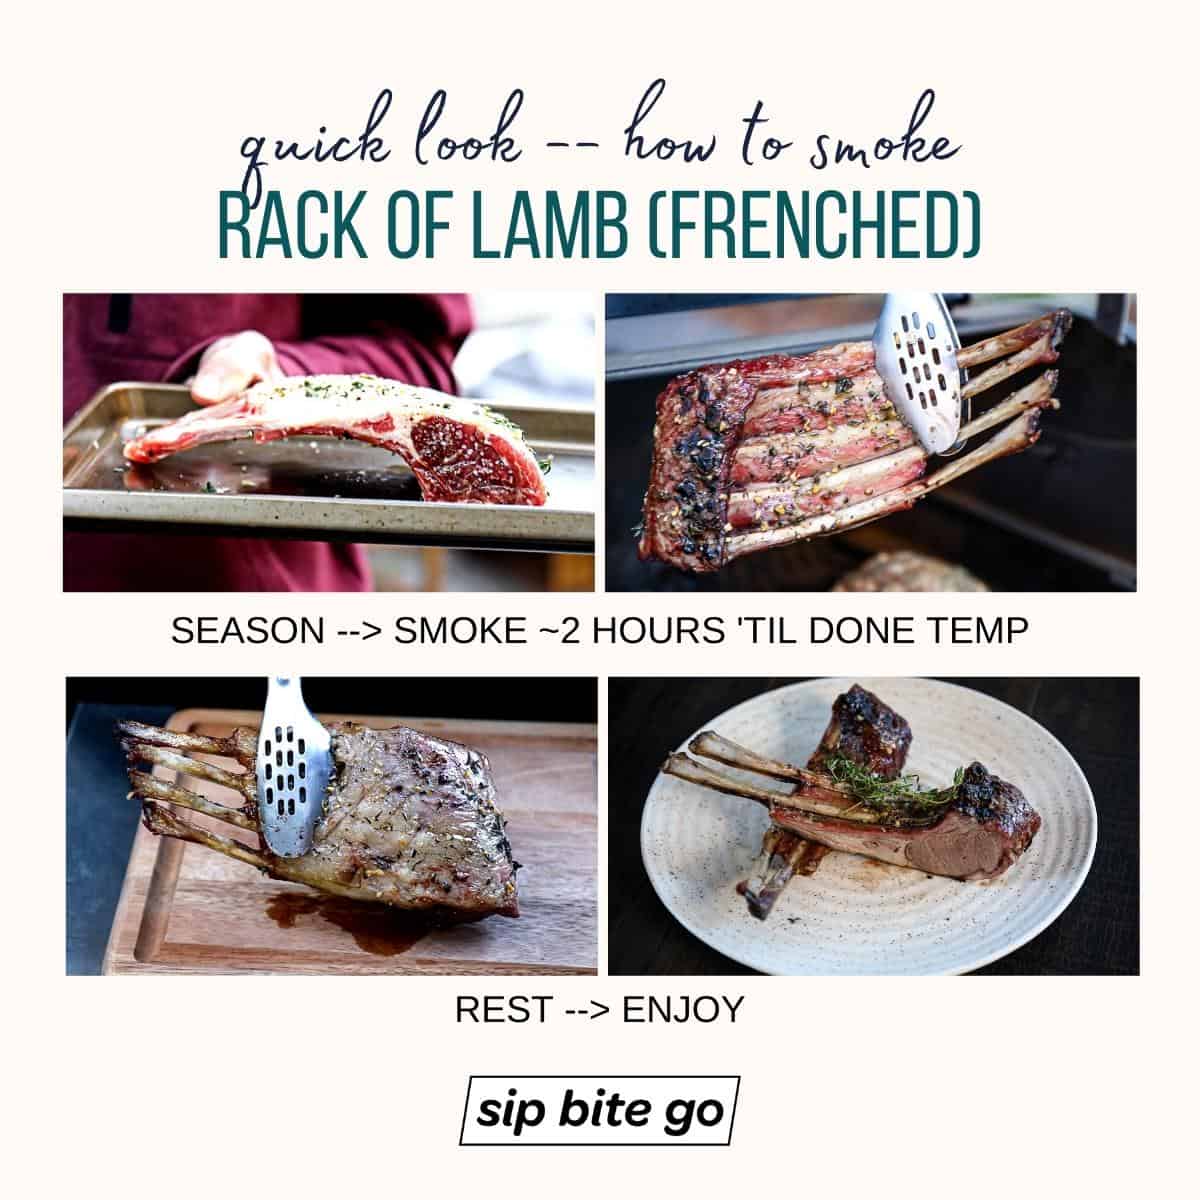 Infographic with recipe steps for smoking rack of lamb on pellet grills